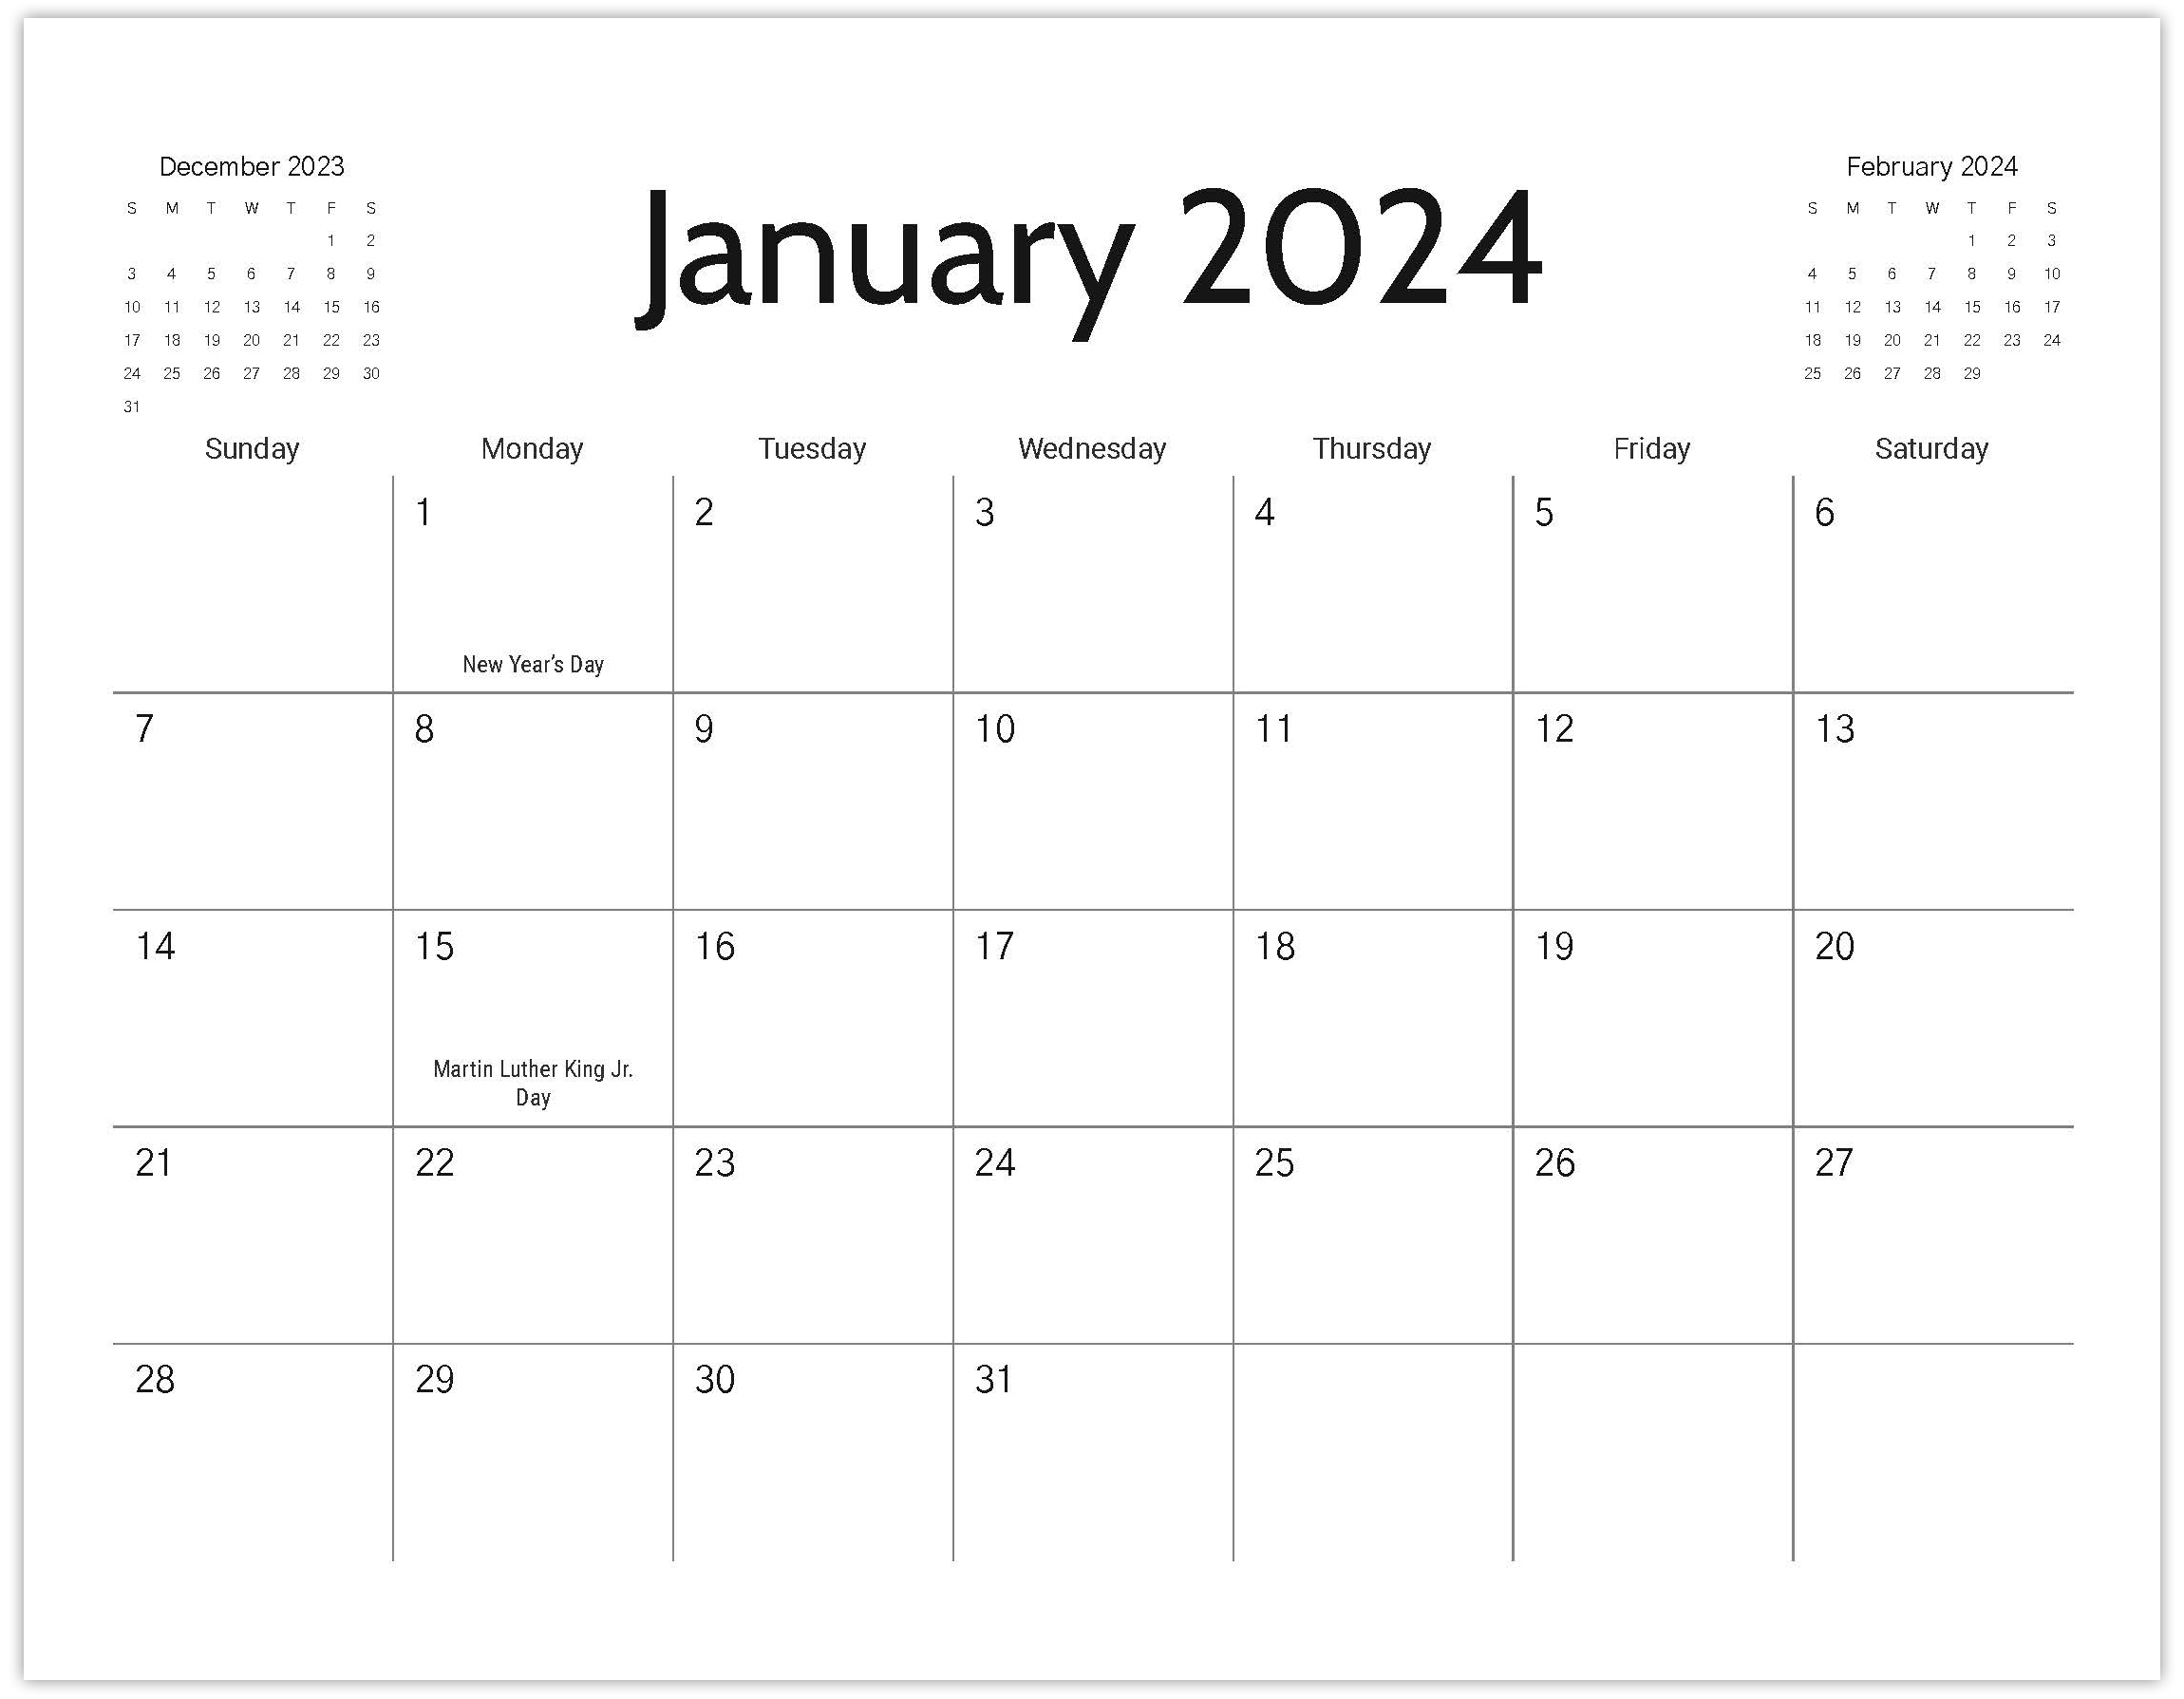 Free Printable Calendar 2024 | Free Printable Calendar 2024 Monthly With Holidays